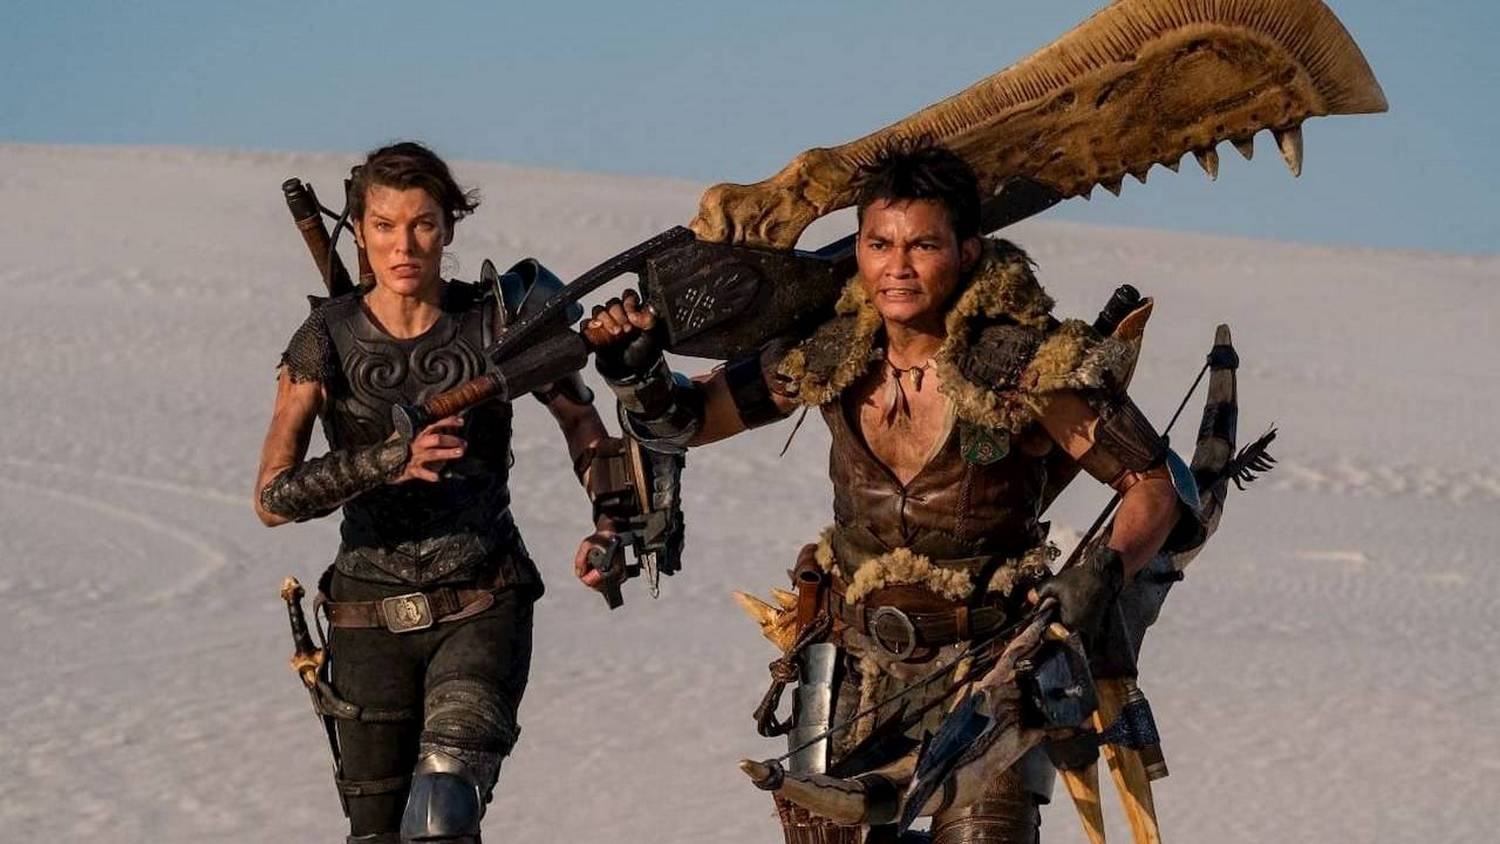 Monster Hunter Review: Paul W.S. Anderson Lowers the Bar with Another Video Game Movie | Den of Geek